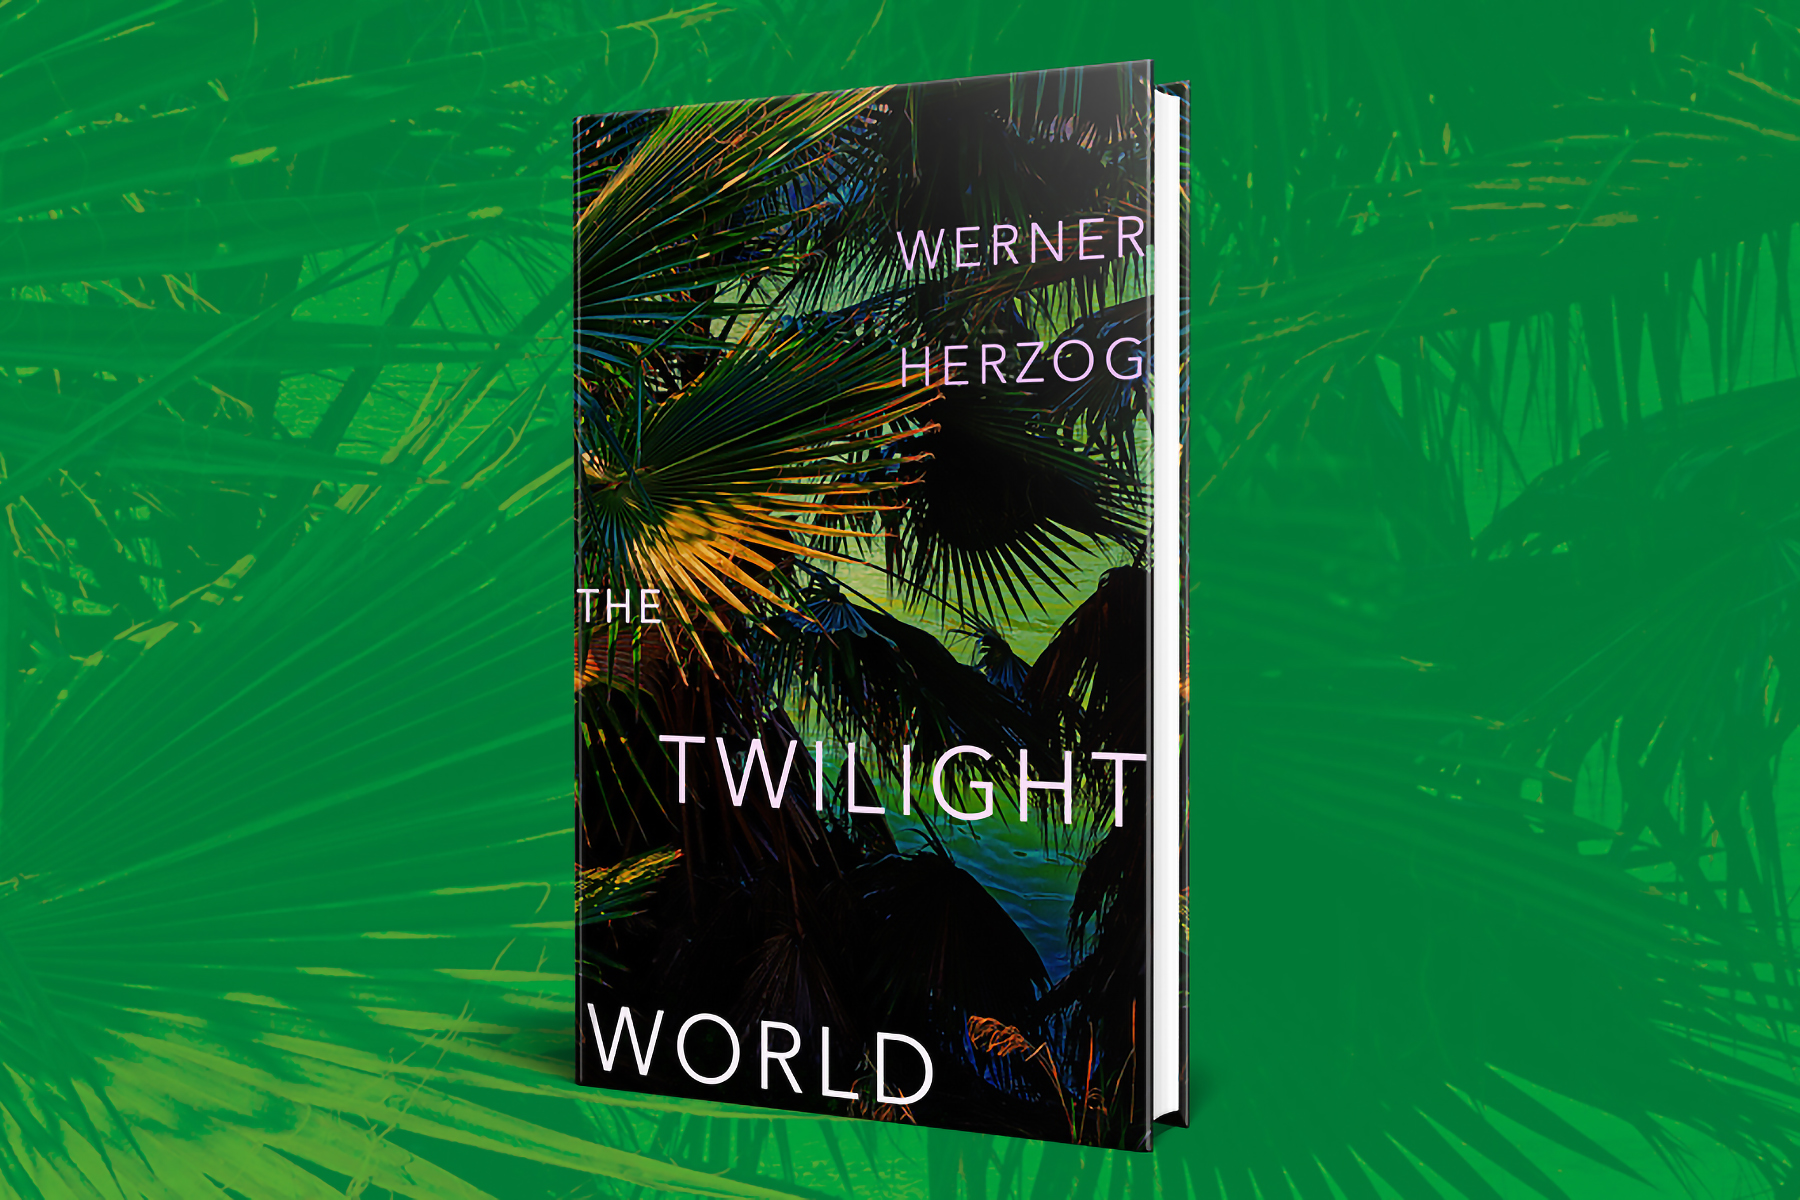 Image of a book, The Twilight World by Werner Herzog, against a green jungle background